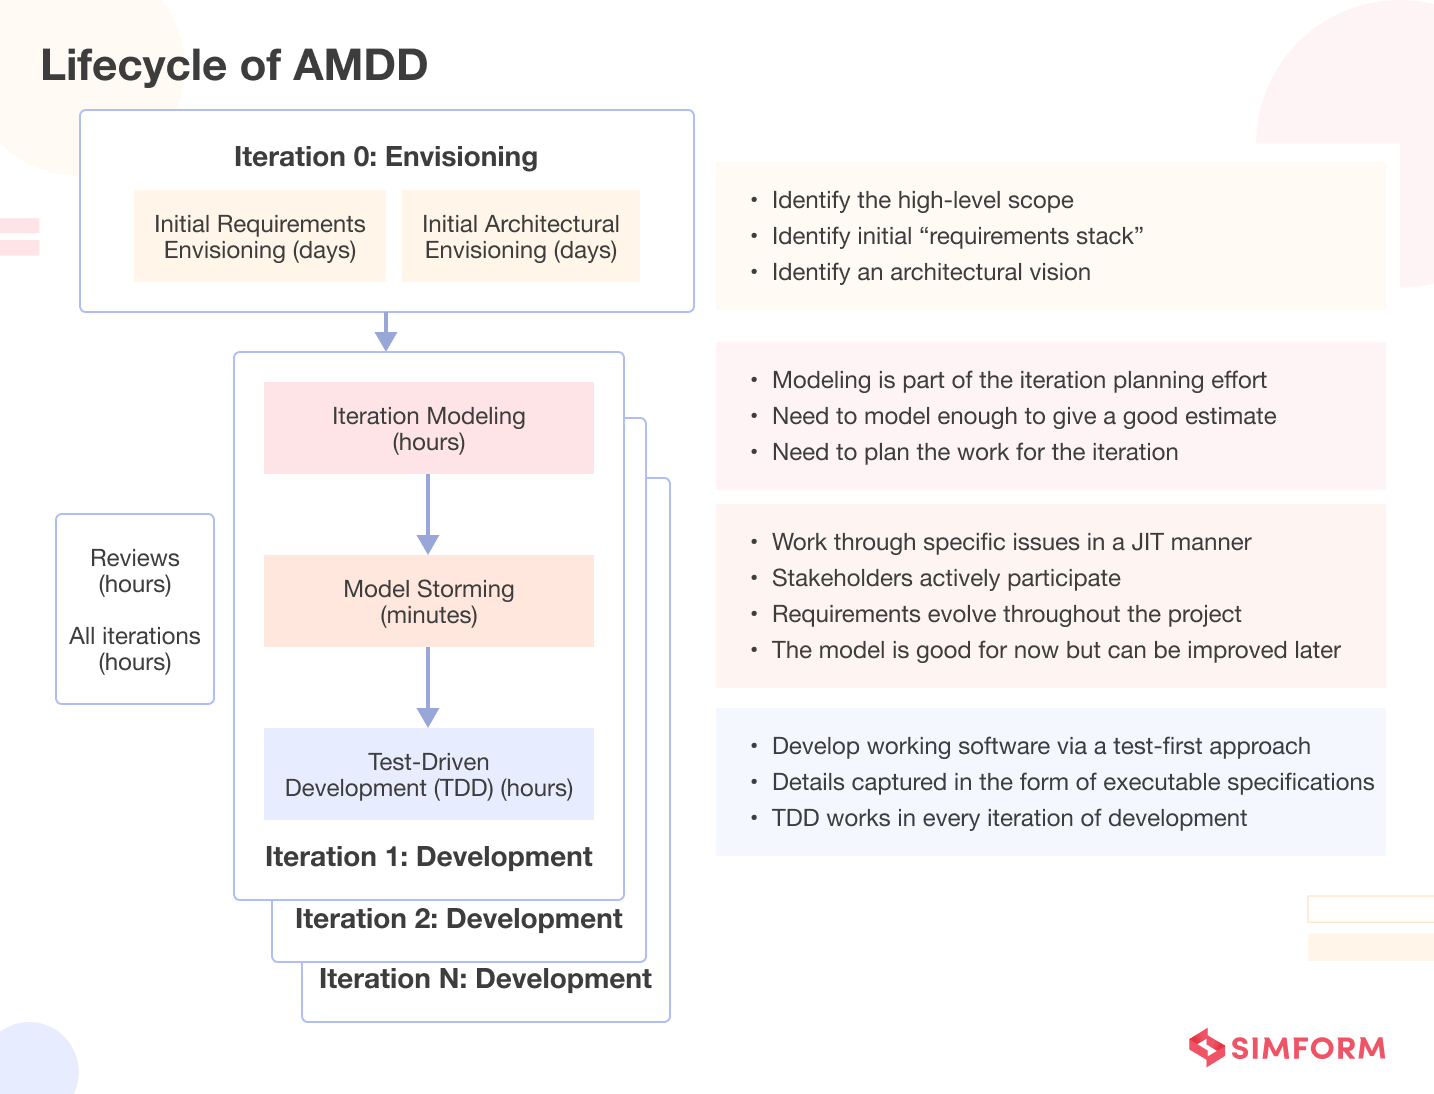 Lifecycle of AMDD